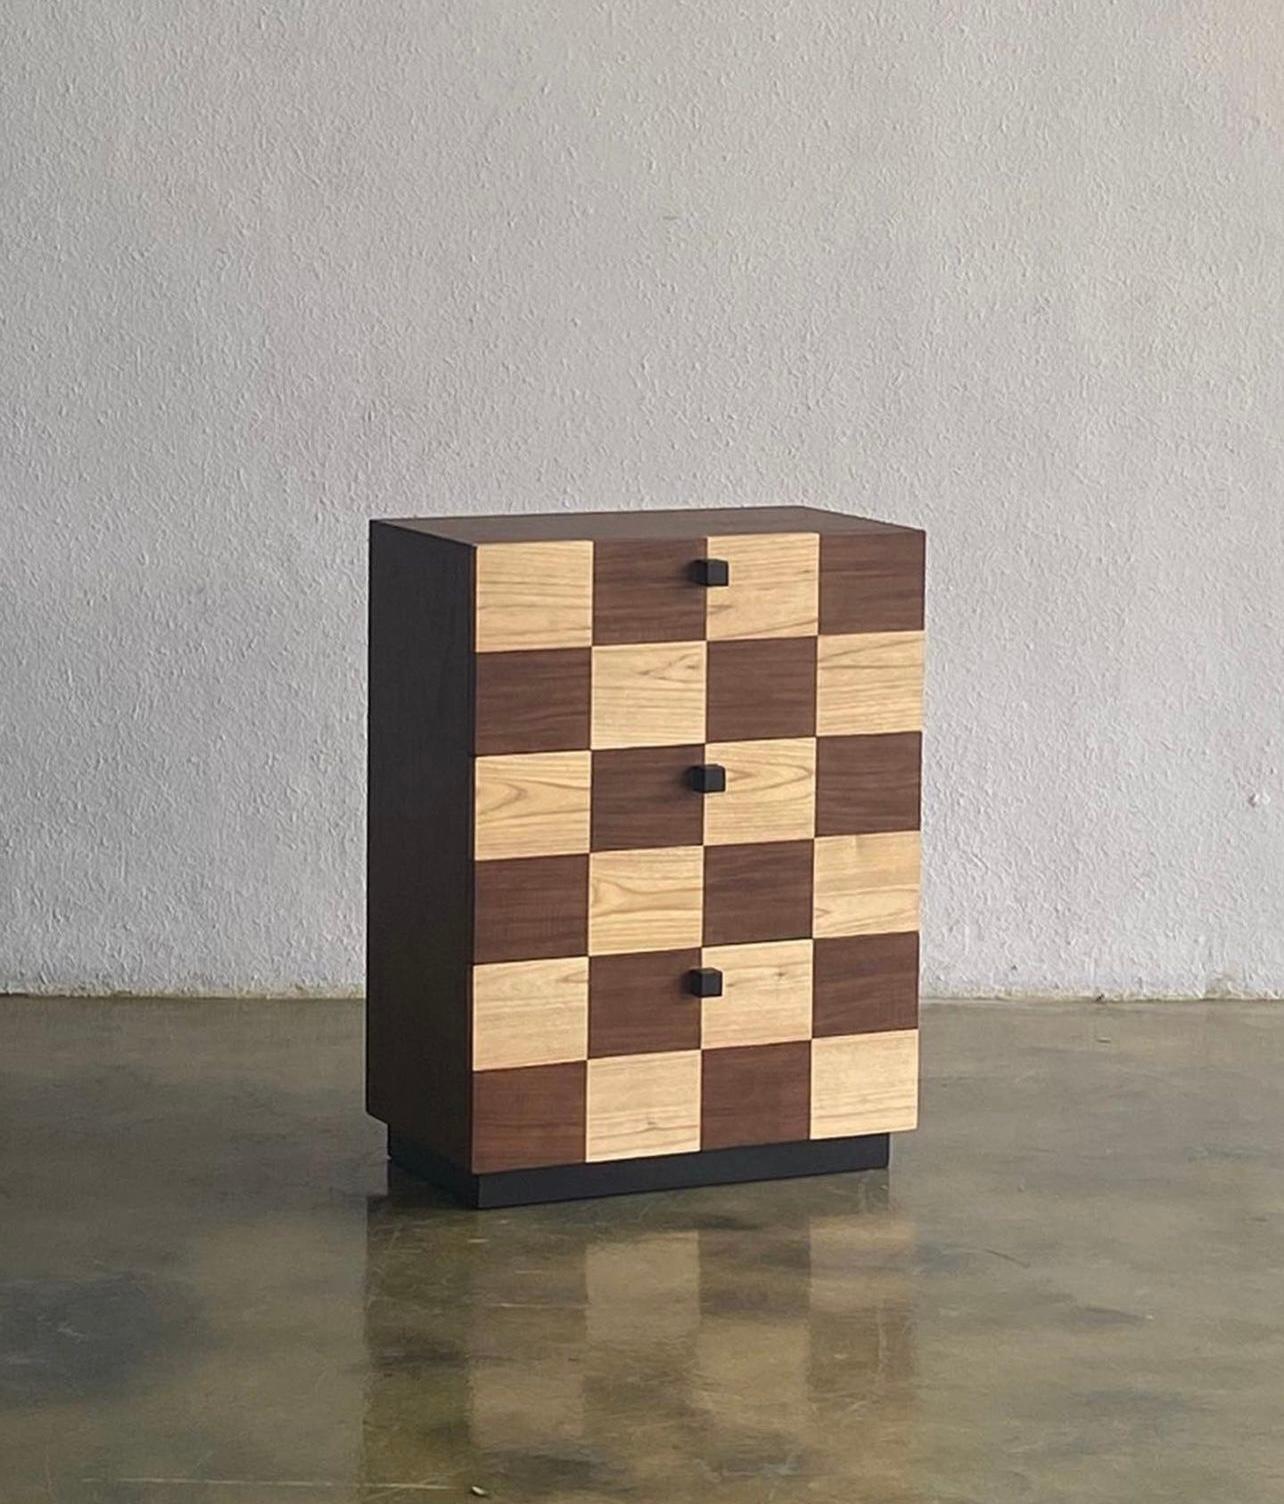 Large Coklat Side Table by Studio Kallang
Dimensions: W 60 x D 37 x H 80 cm
Materials: Solid Teak, Solid Sungkai. 

STUDIO KALLANG IS A SINGAPORE AND SEATTLE BASED PROJECT FOCUSING ON OBJECTS DESIGNED BY FAEZAH SHAHARUDDIN.
PIECES ARE PLAYFUL